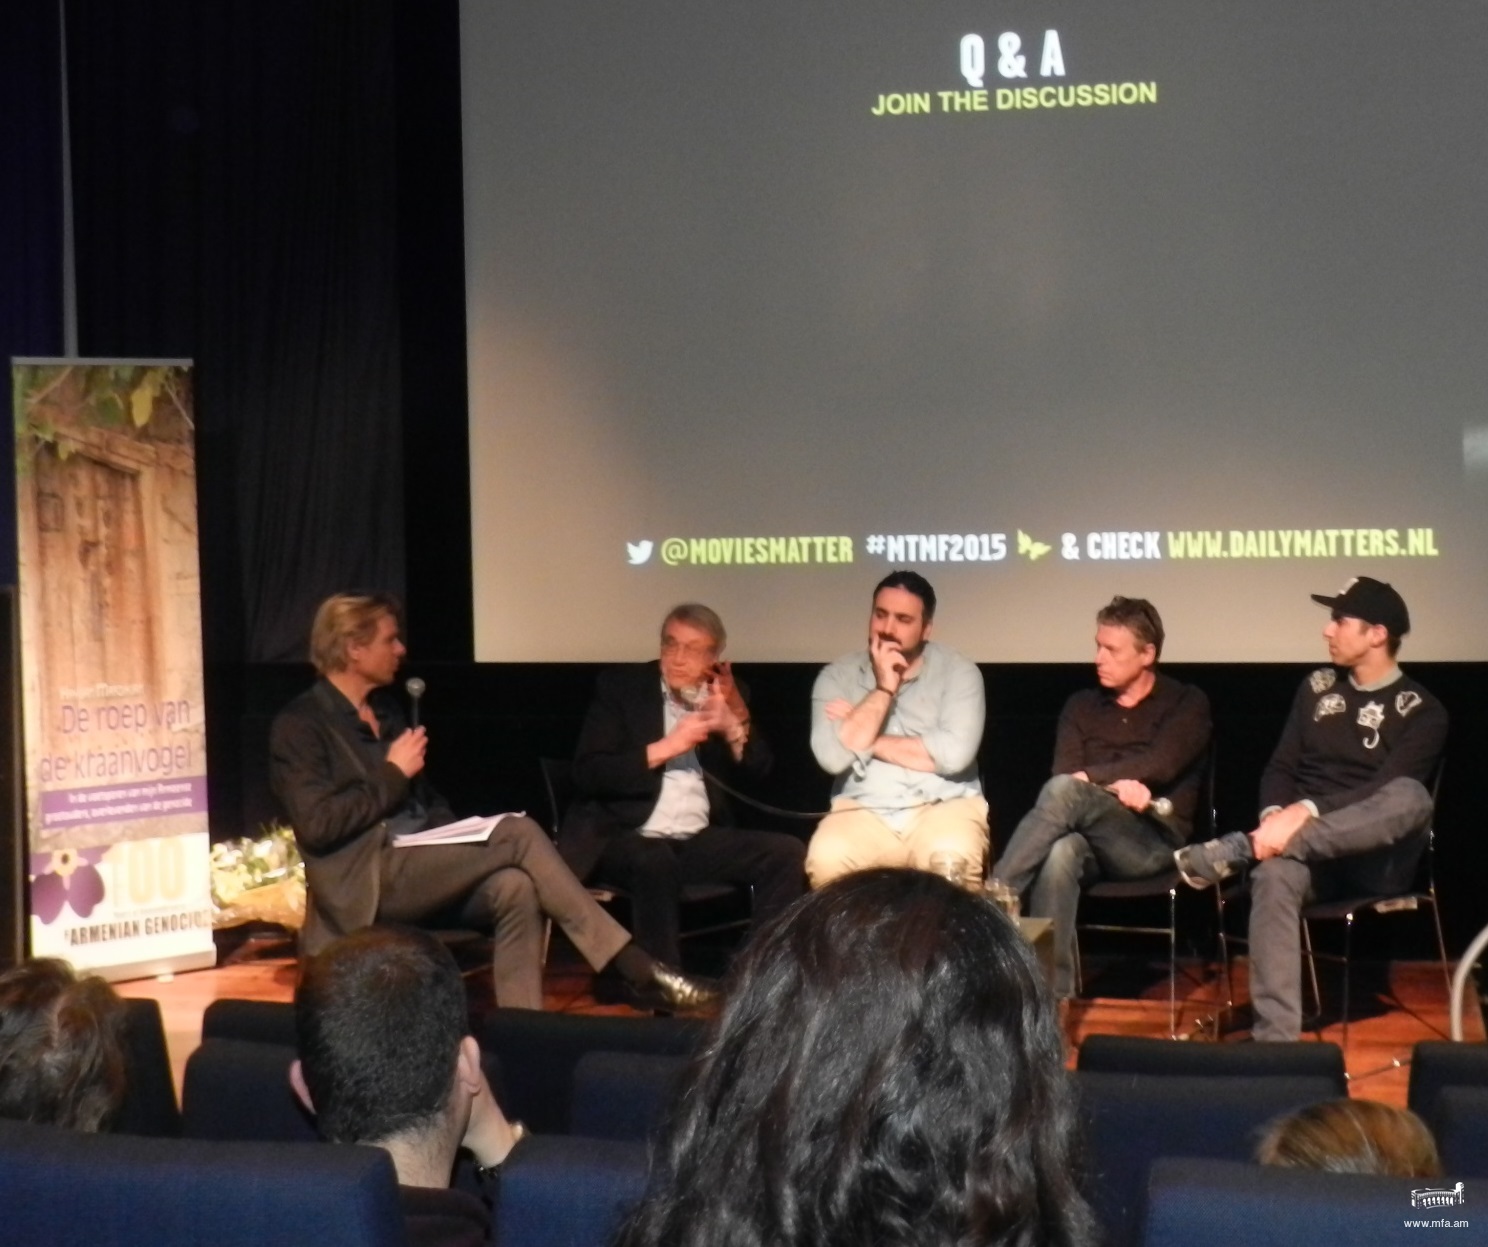 Documentary movie “Bloodbrothers”, dedicated to the Centennial of the Armenian Genocide, well-received in the Netherlands